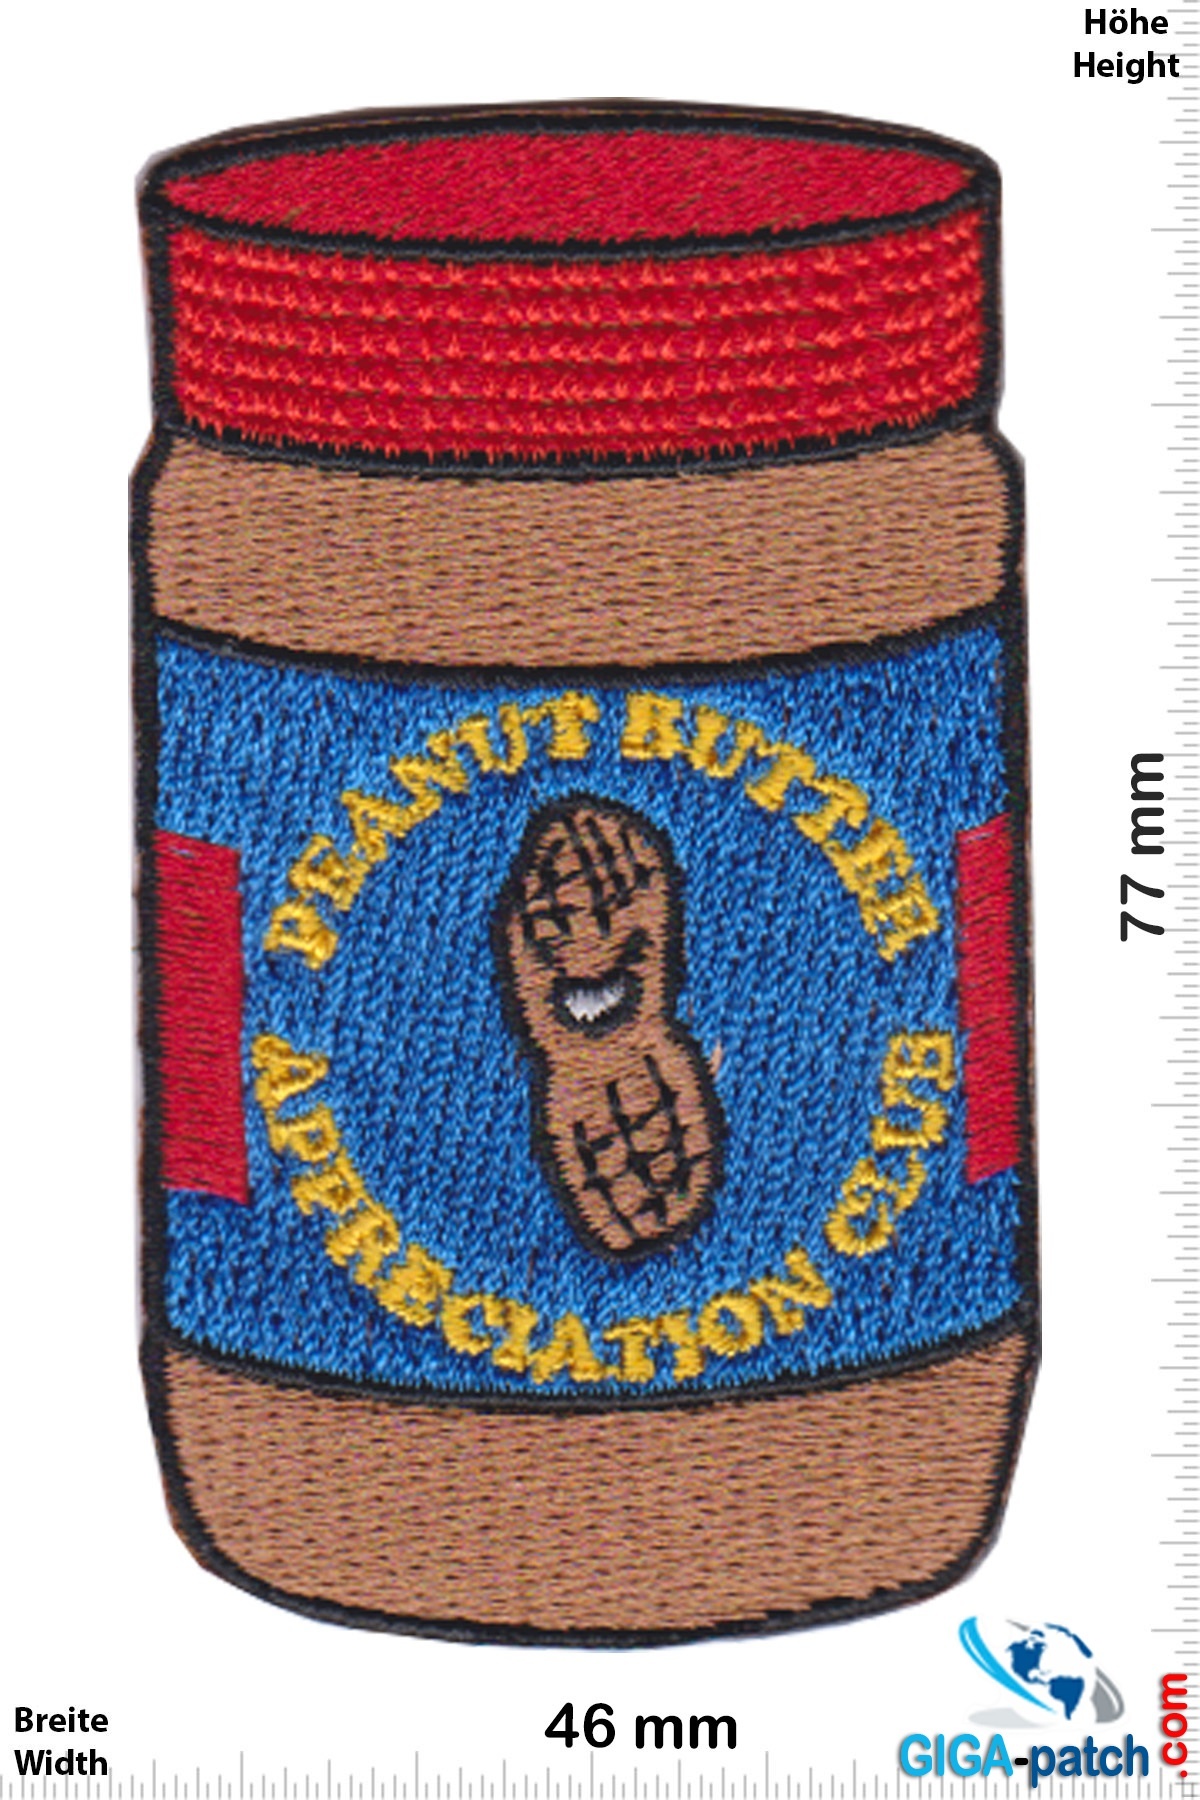 Fun - Peanut Butter Appreciation Club- Patch - Back Patches - Patch  Keychains Stickers -  - Biggest Patch Shop worldwide